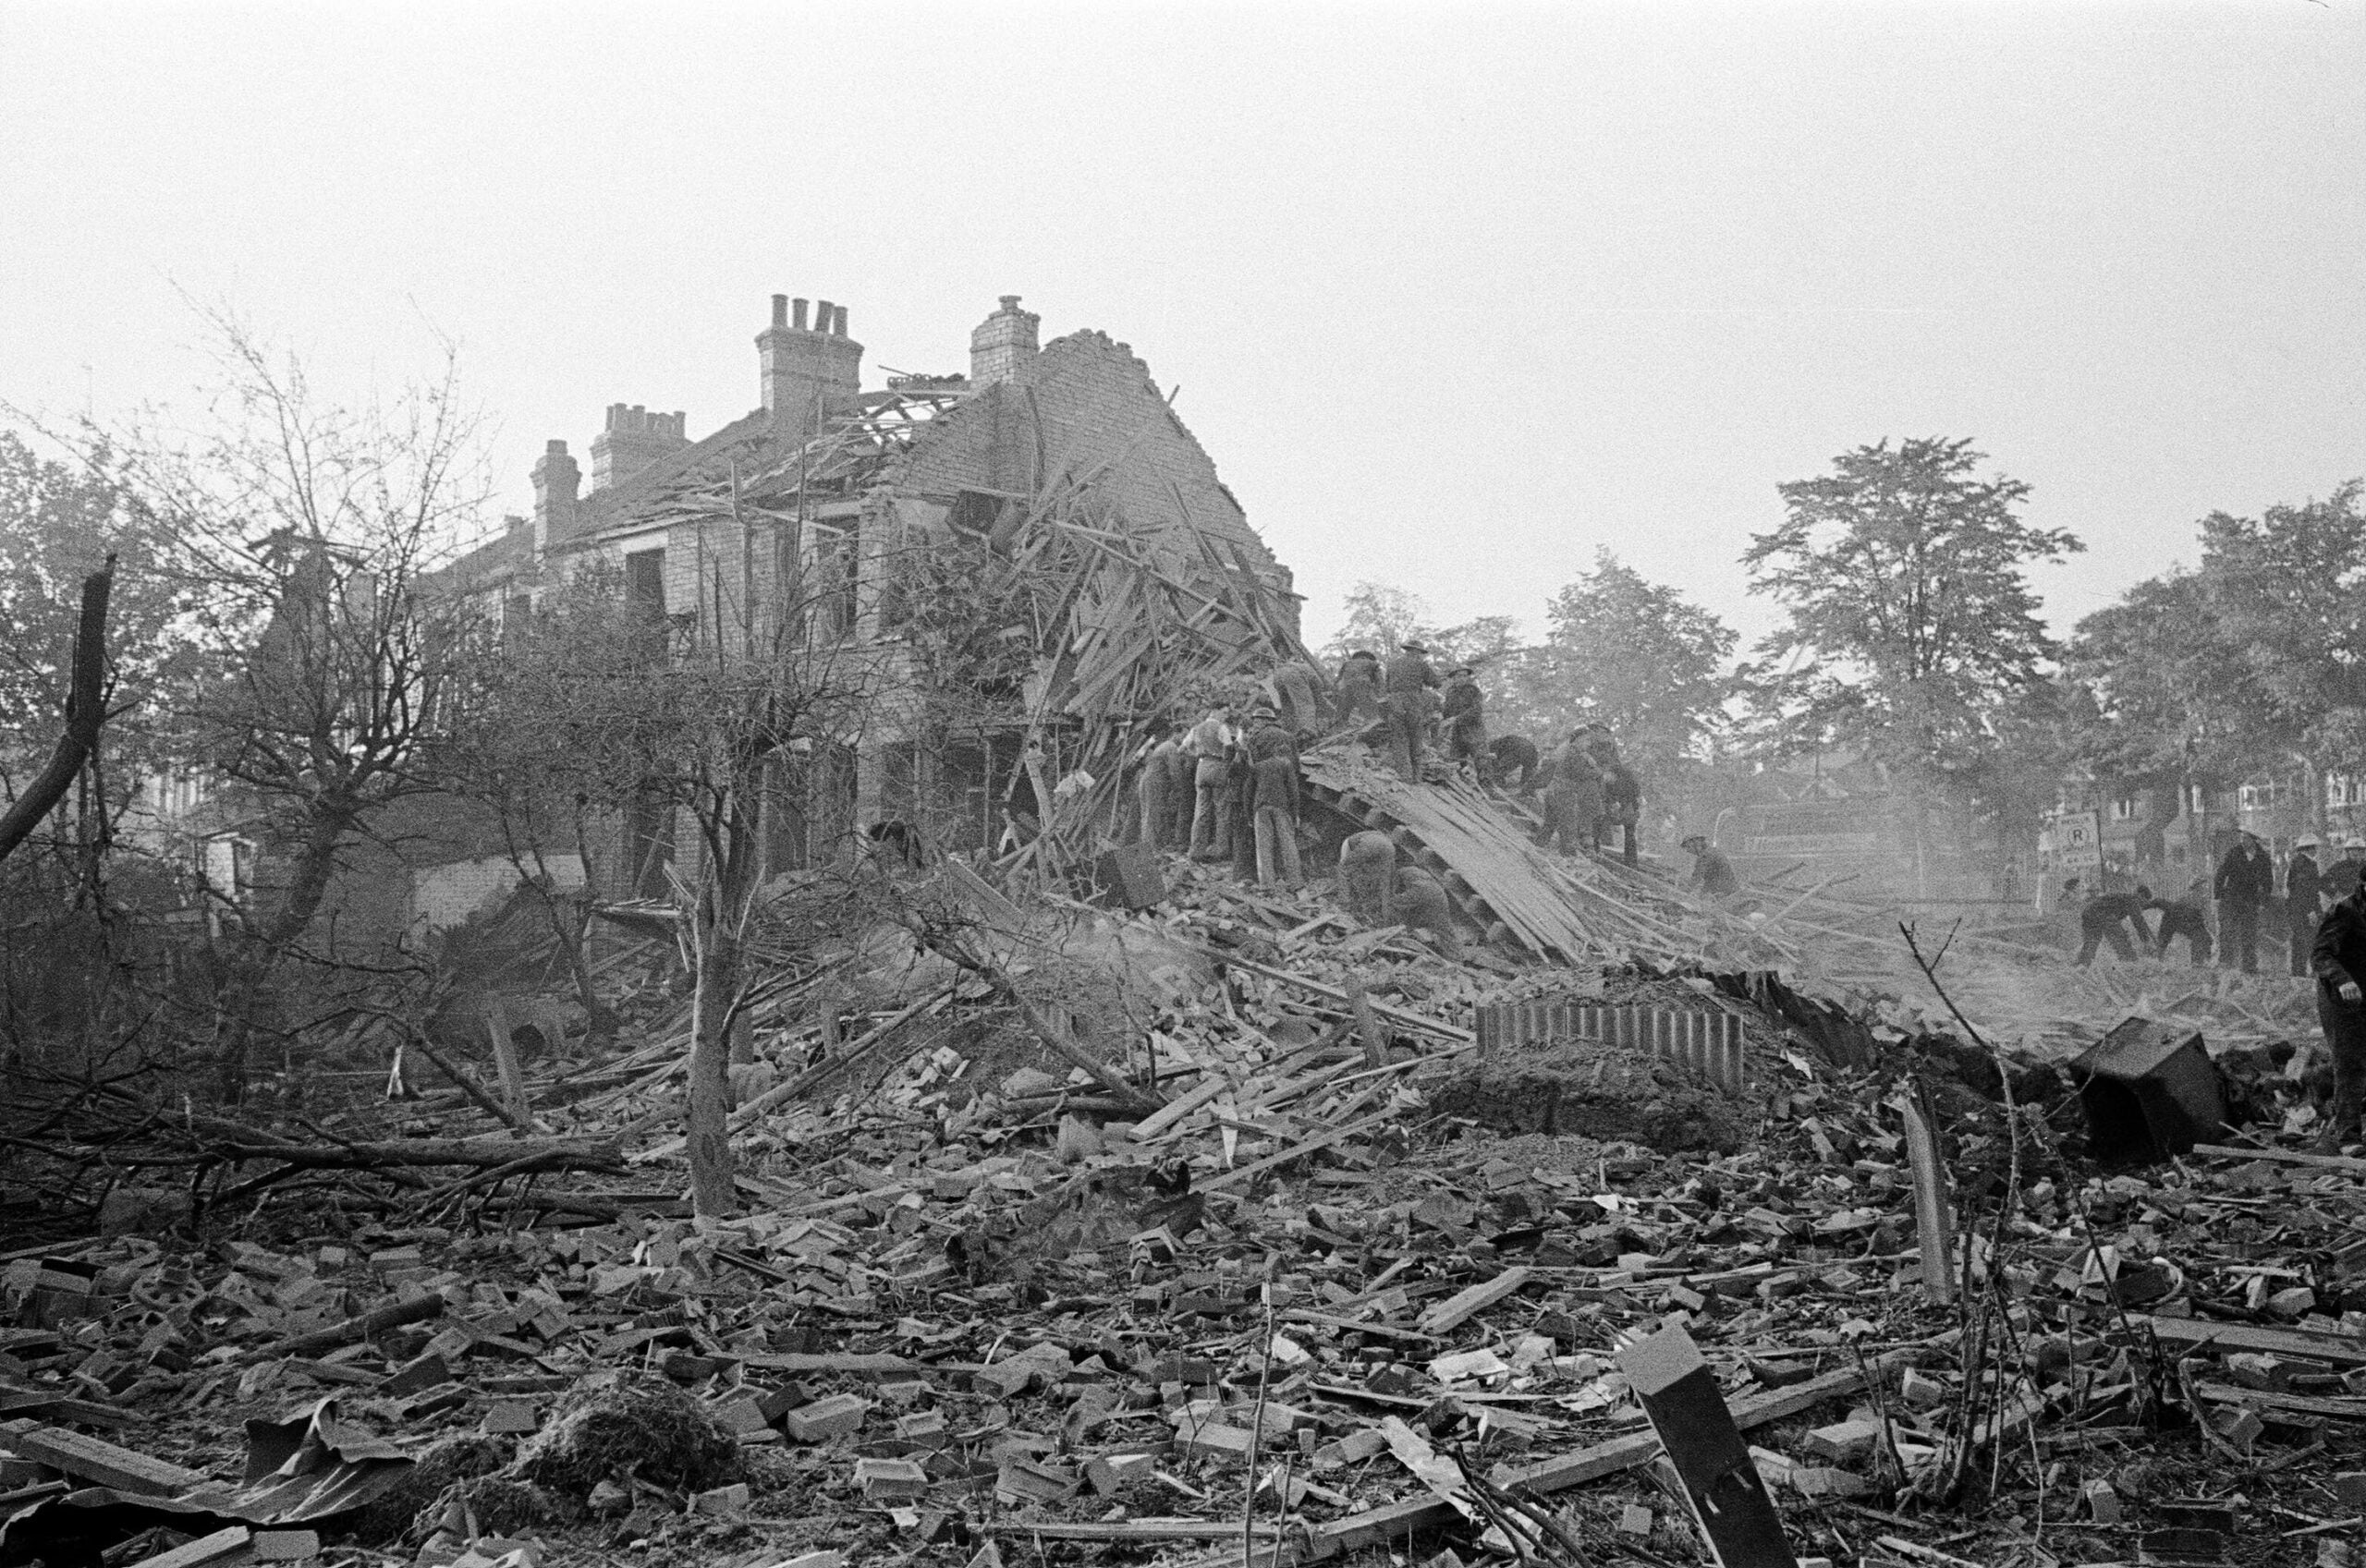 V2 Rocket incident at Tewkesbury Terrace, Bounds Green Road, Southgate. Parts of the rocket after the explosion. 16th September 1944. (Photo by Daily Mirror/Mirrorpix/Mirrorpix via Getty Images)